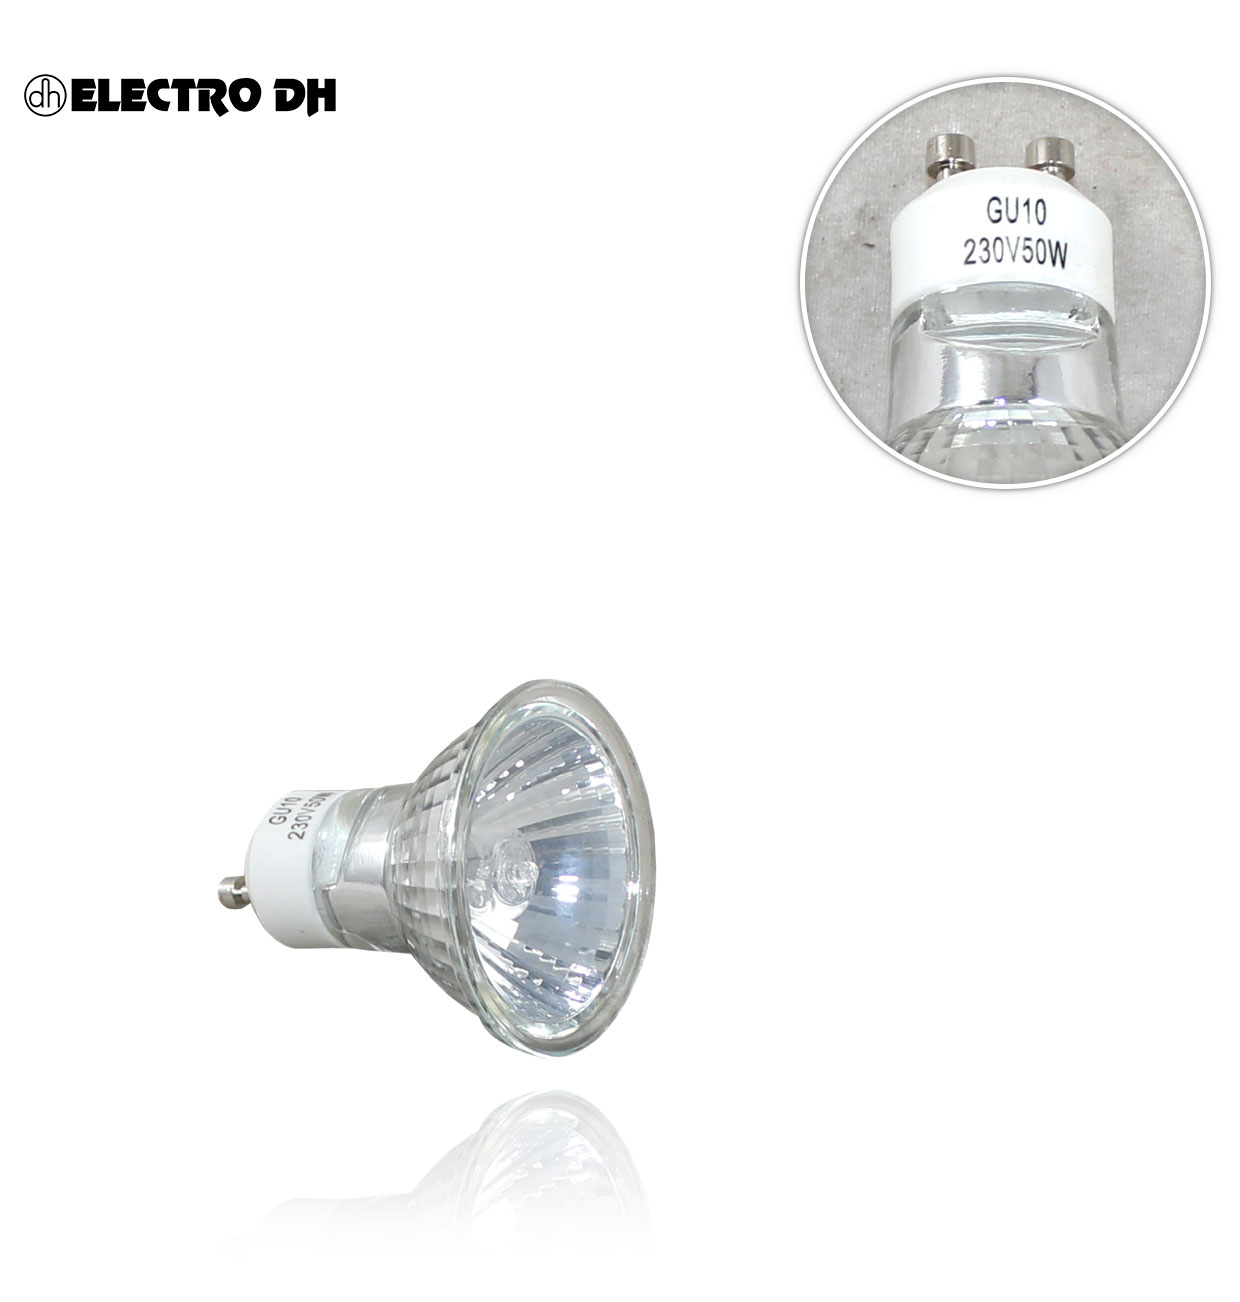 HALOGEN LIGHT BULB 50W  DICROICA WITHOUT A 230V TRANSFORMER, WITH PROTECTIVE CRYSTAL